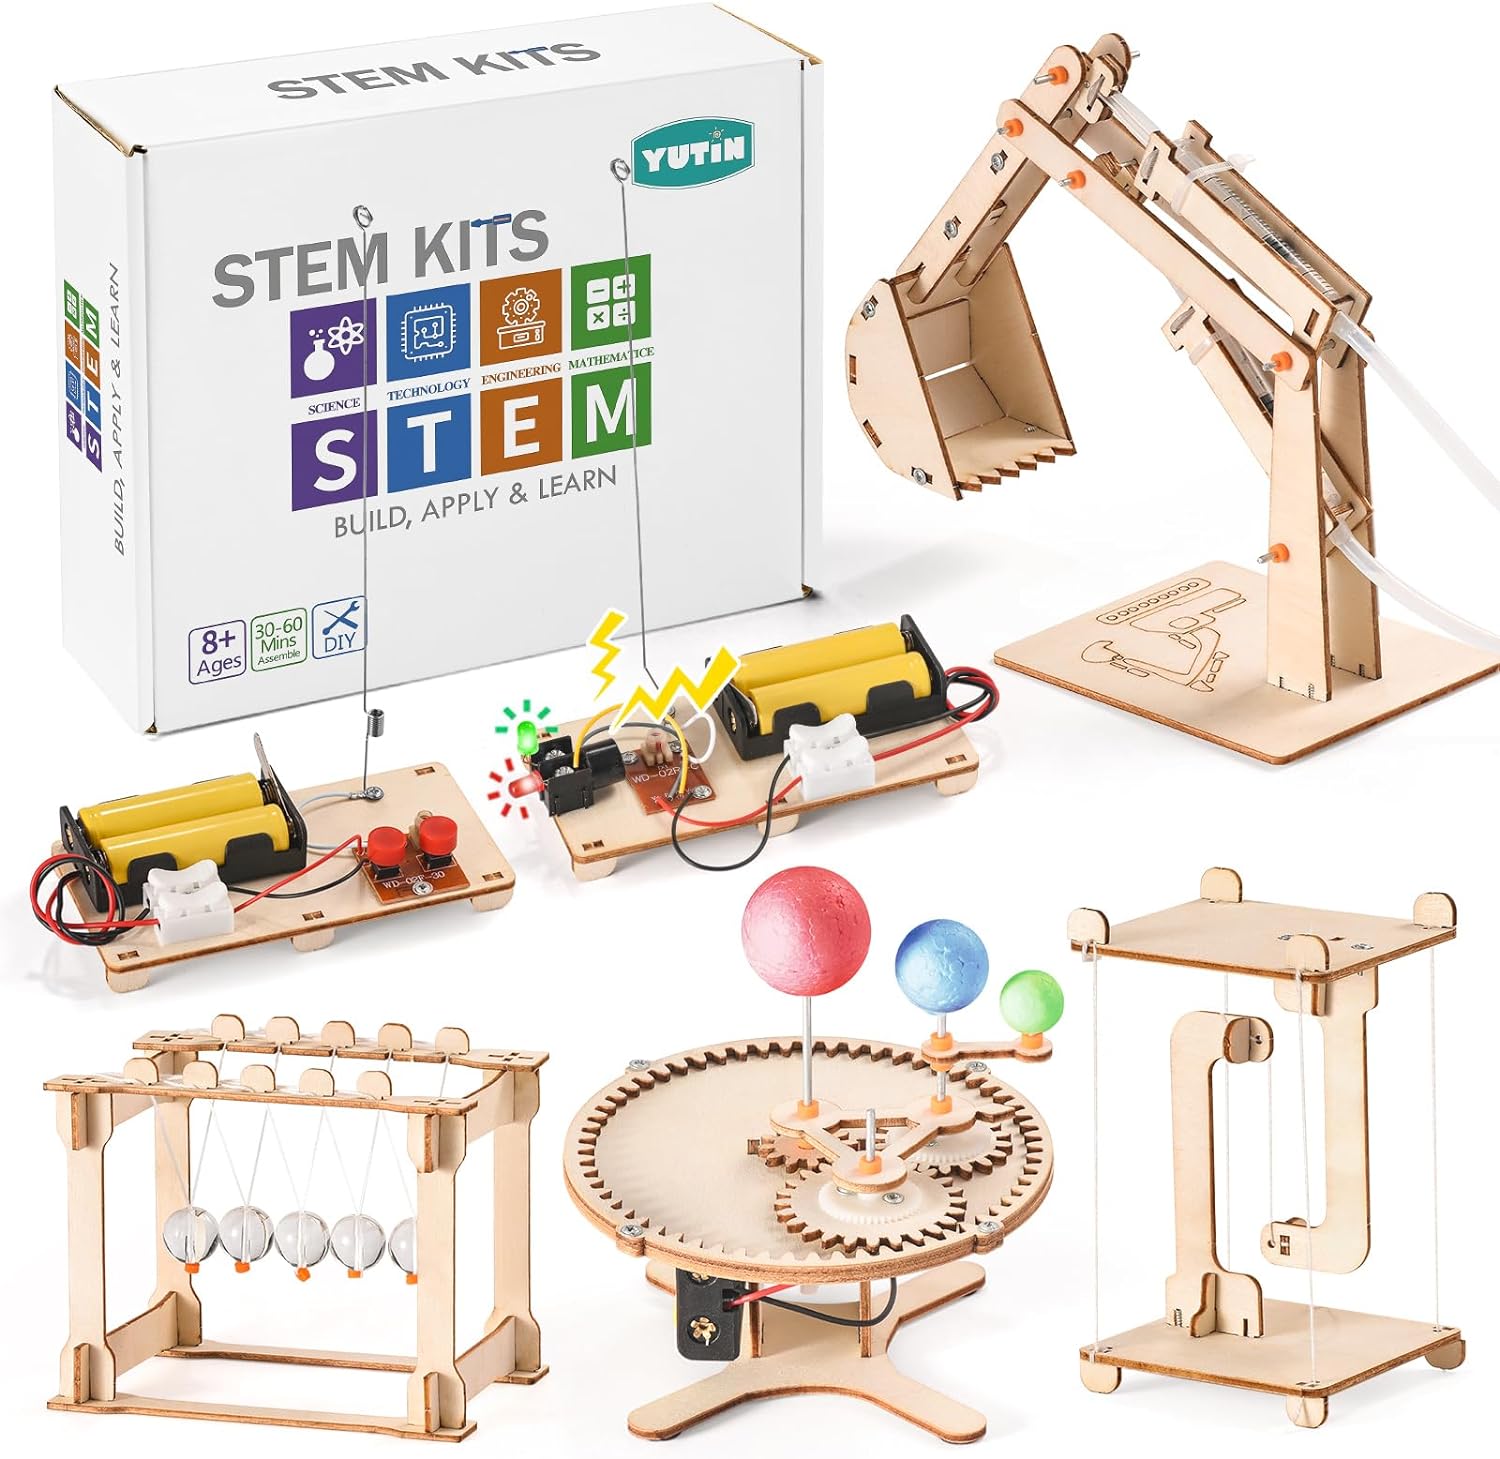 STEM Science Kits, 5 Set Building Kits for Kids Ages 8-12, 3D Wooden Puzzles, Wood Crafts for Boys 6-8, Science Experiment Projects, Woodworking Model Kit, STEM Toys for 6 7 8 9 10 11 12 14 Years Old : Toys Games